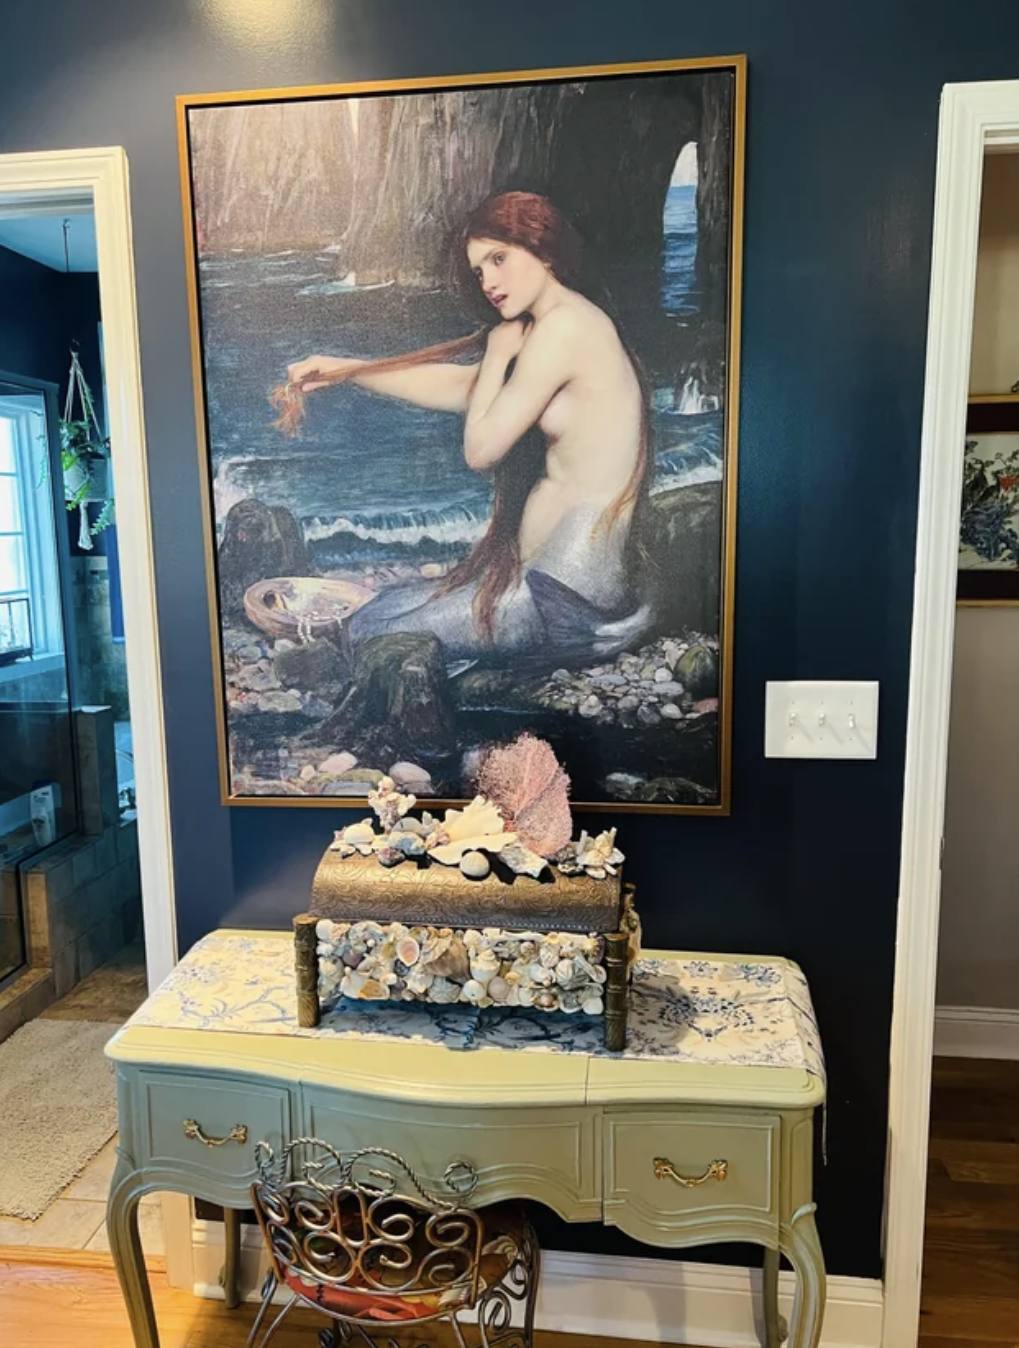 This little space in a home has a portrait of a mermaid in front of a chest decorated with shells